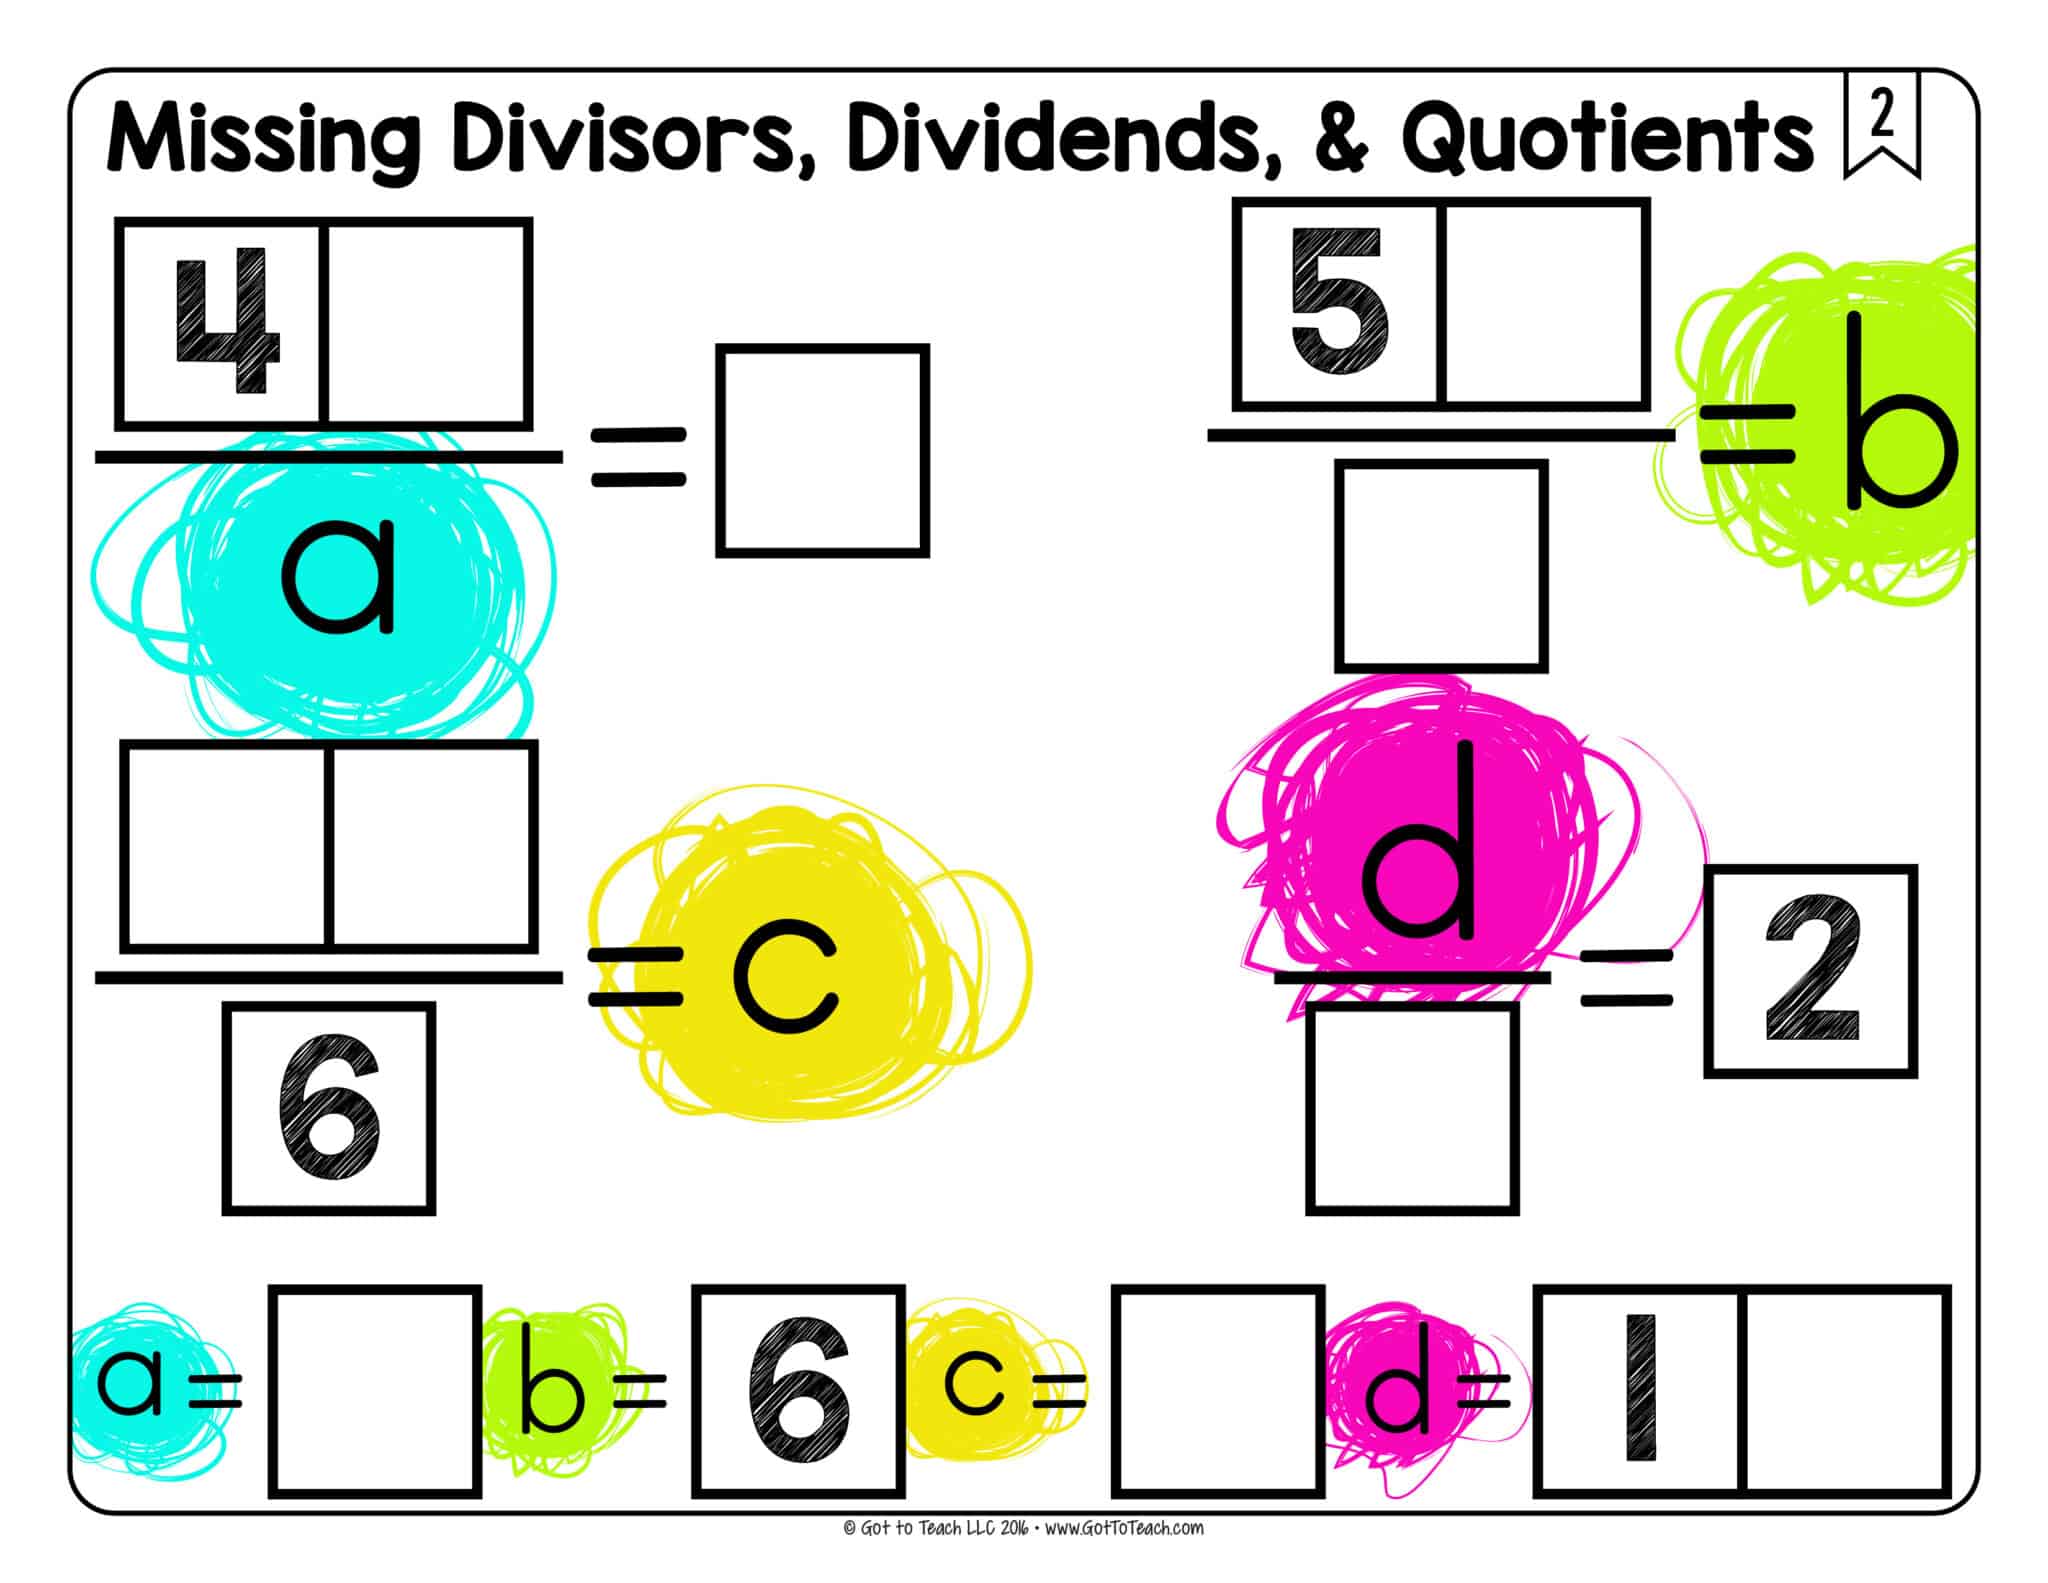 Missing Divisors, Dividends, and Quotients